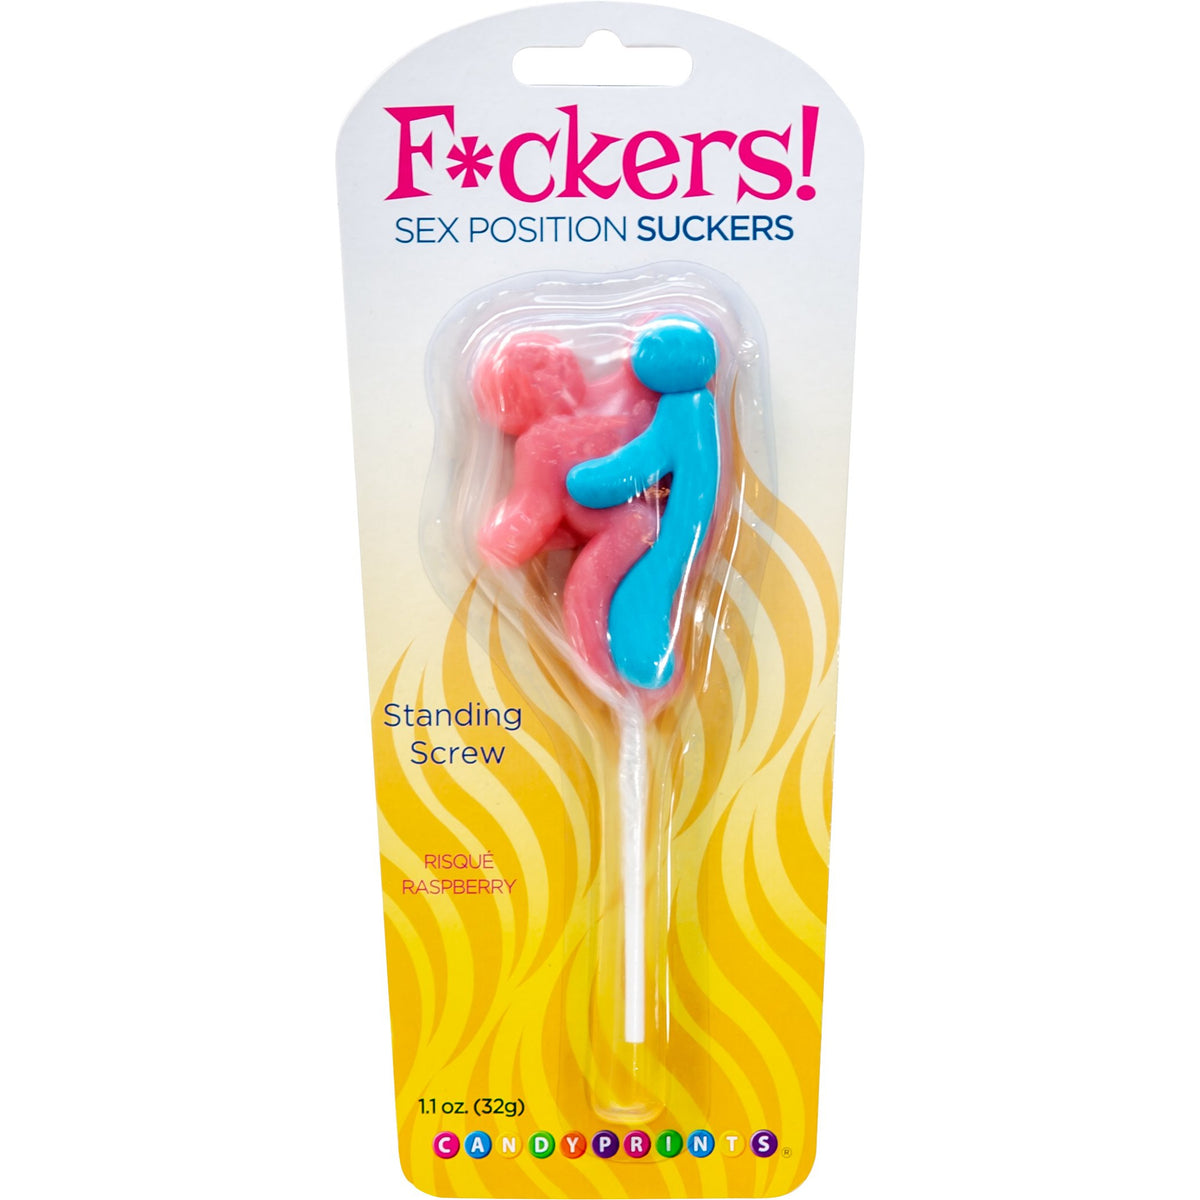 Candyprints Fuckers! Sex Position Sucker Candy - Raspberry